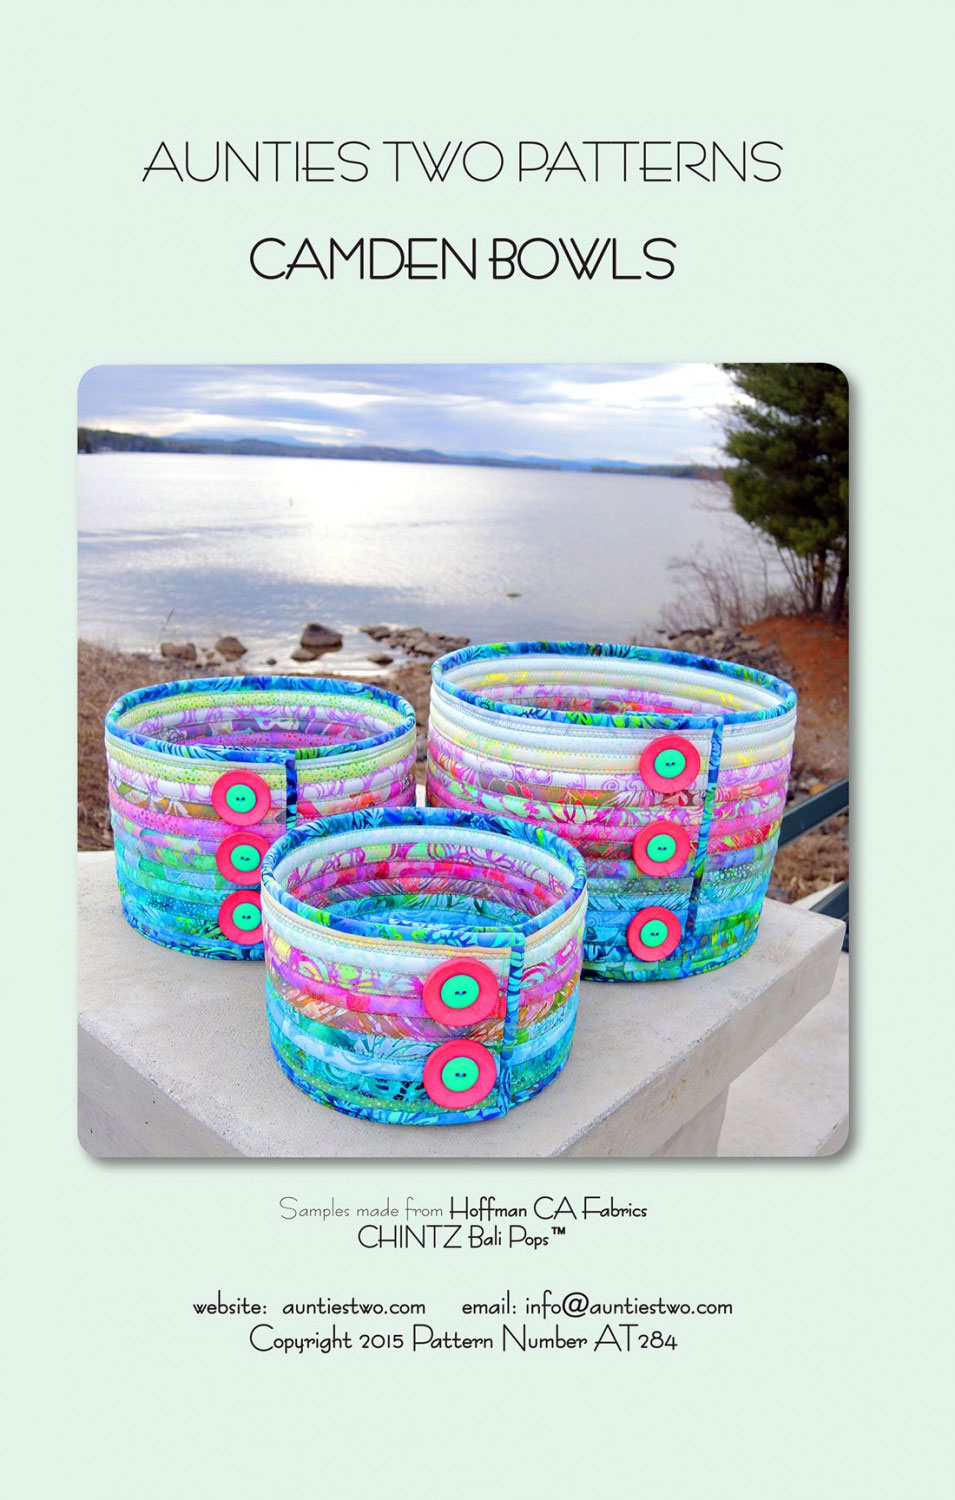 Bowl Me Over 2.0 sewing pattern from By Annie Patterns